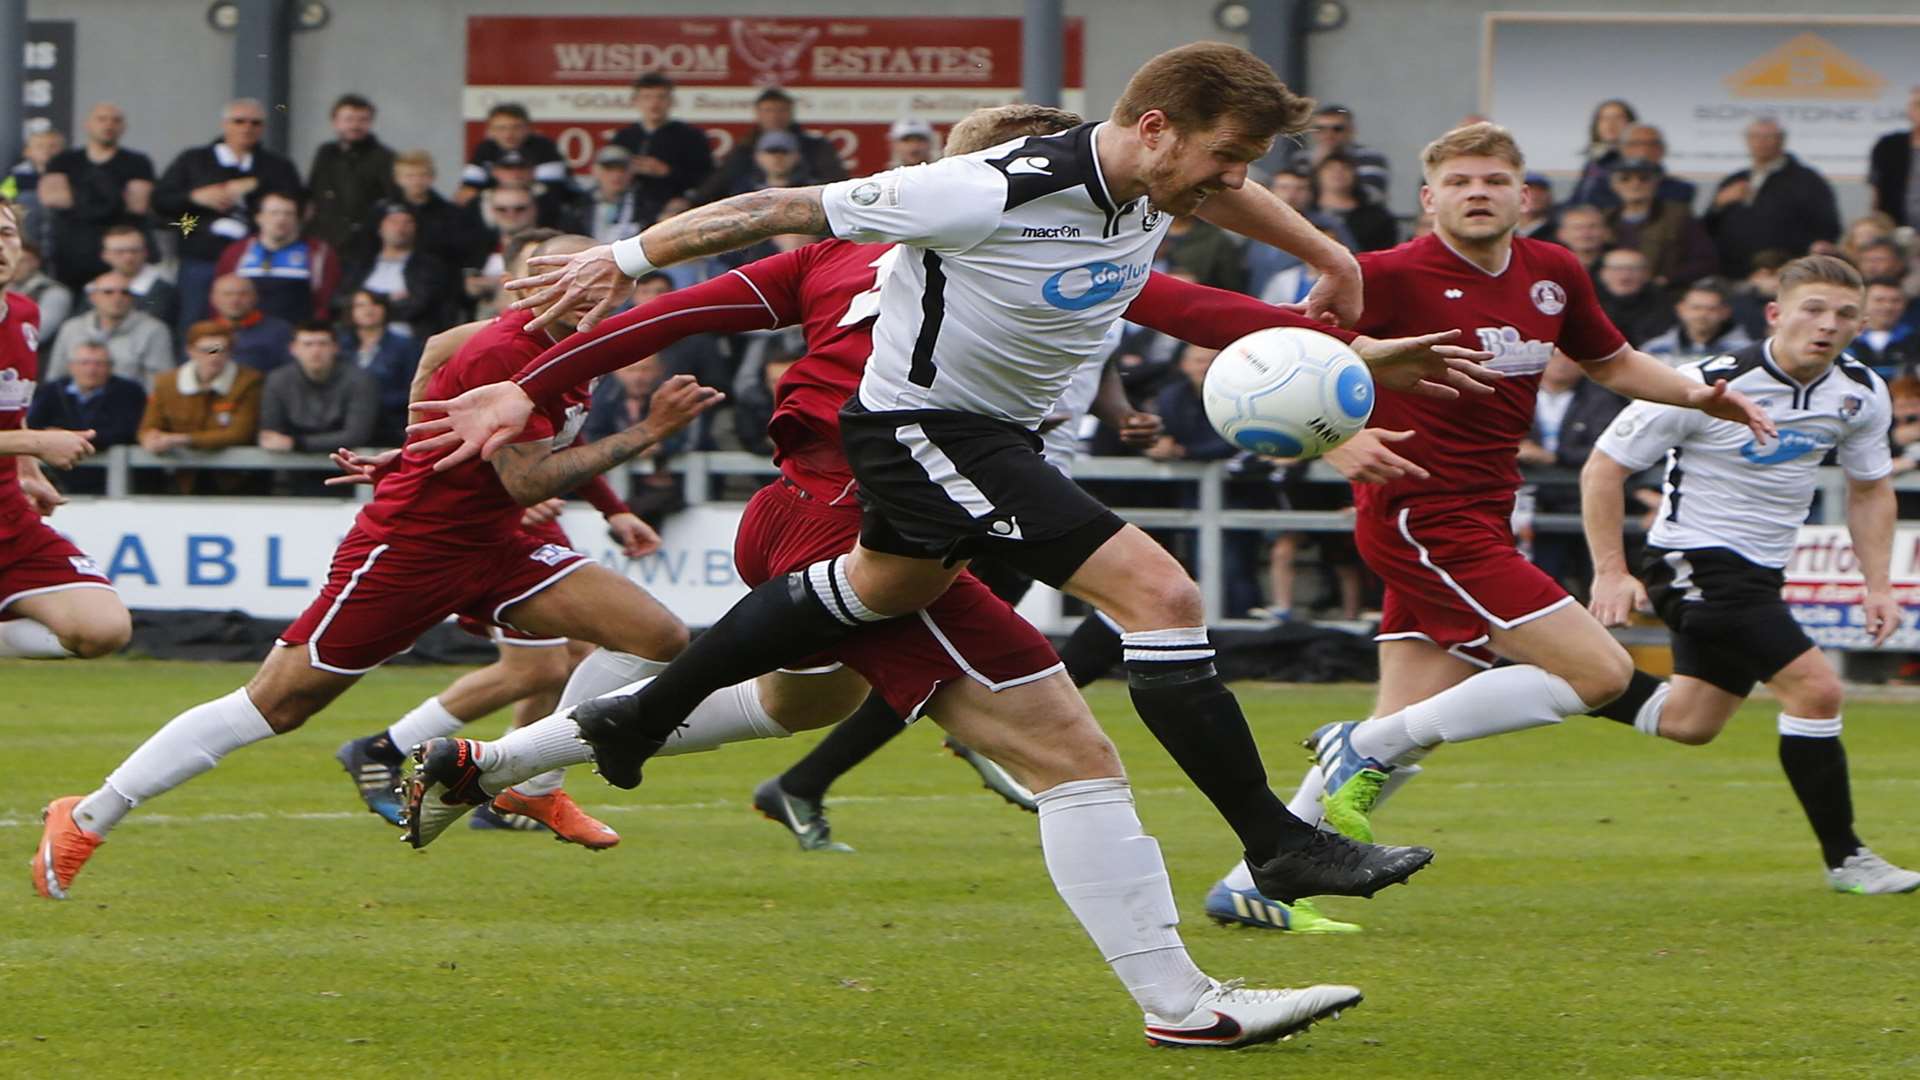 Elliot Bradbrook in action during Dartford's play-off defeat to Chelmsford Picture: Andy Jones